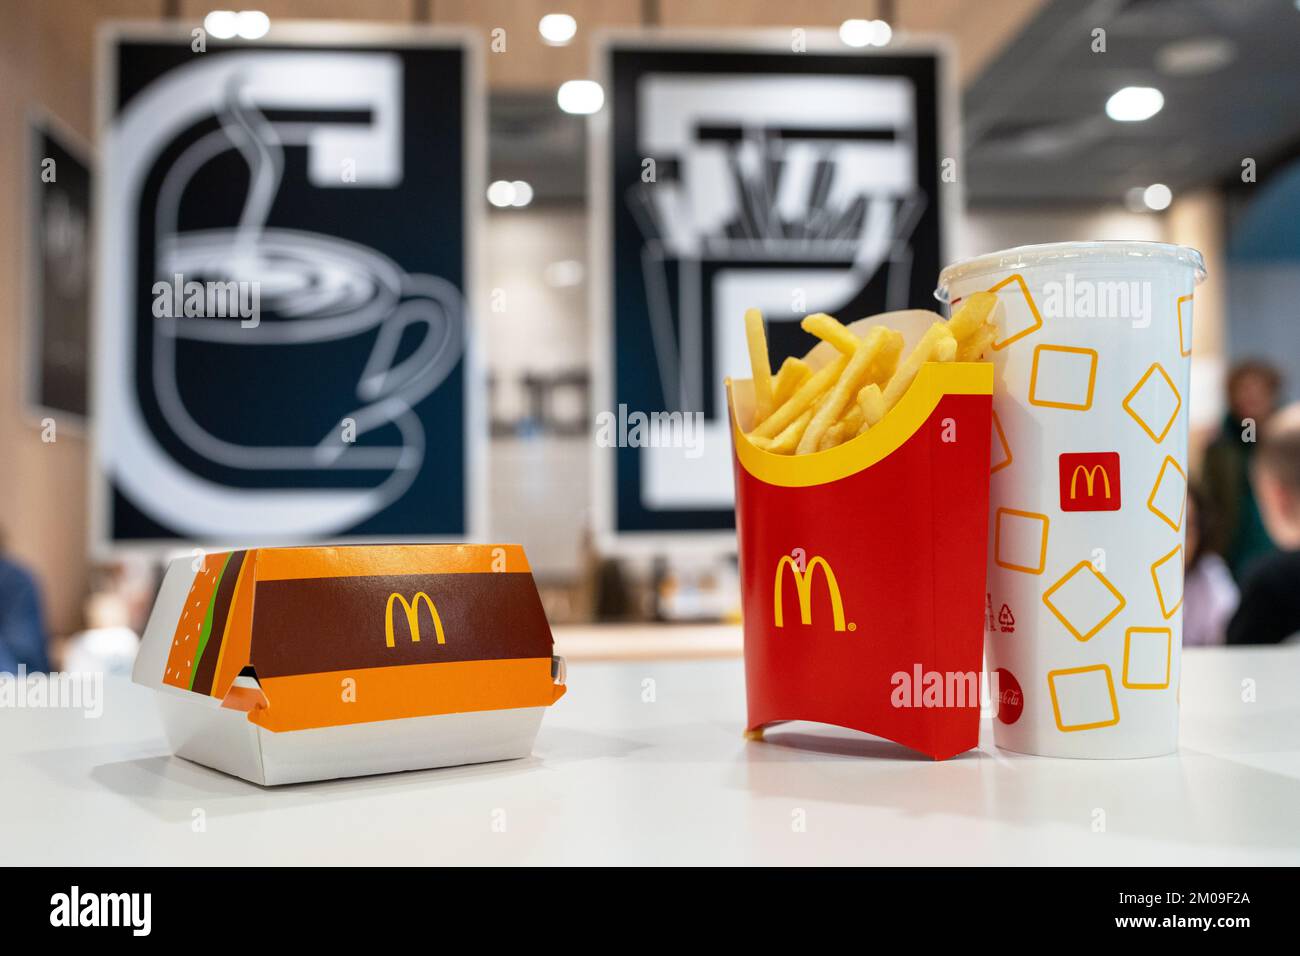 Big Mac Box with McDonald's logo, French Fries and soft drink in McDonald's Restaurant. Stock Photo